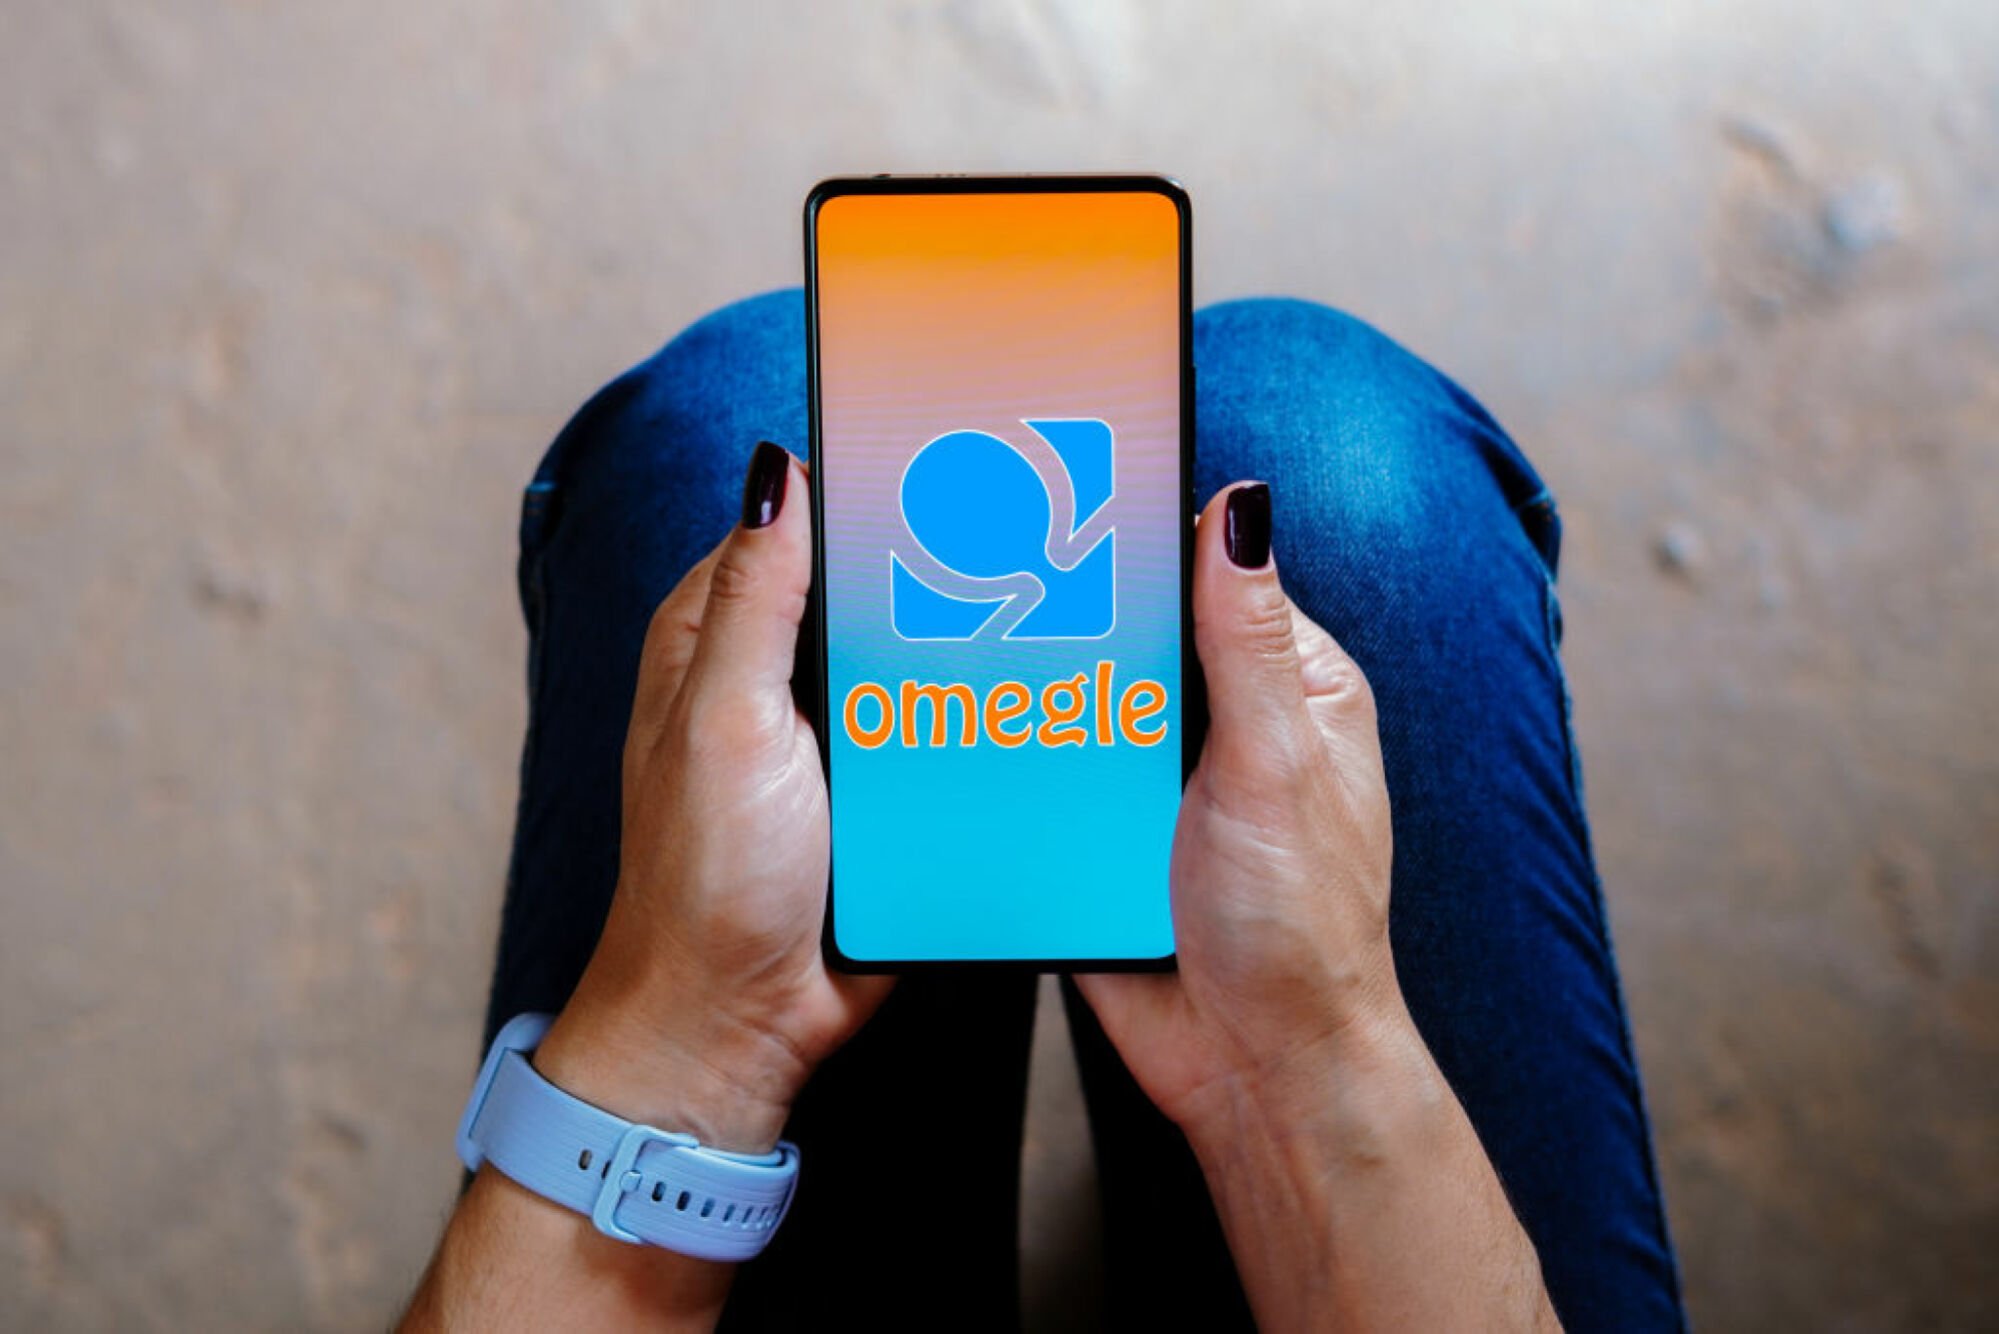 the omegle logo on a smartphone being held in a woman's lap